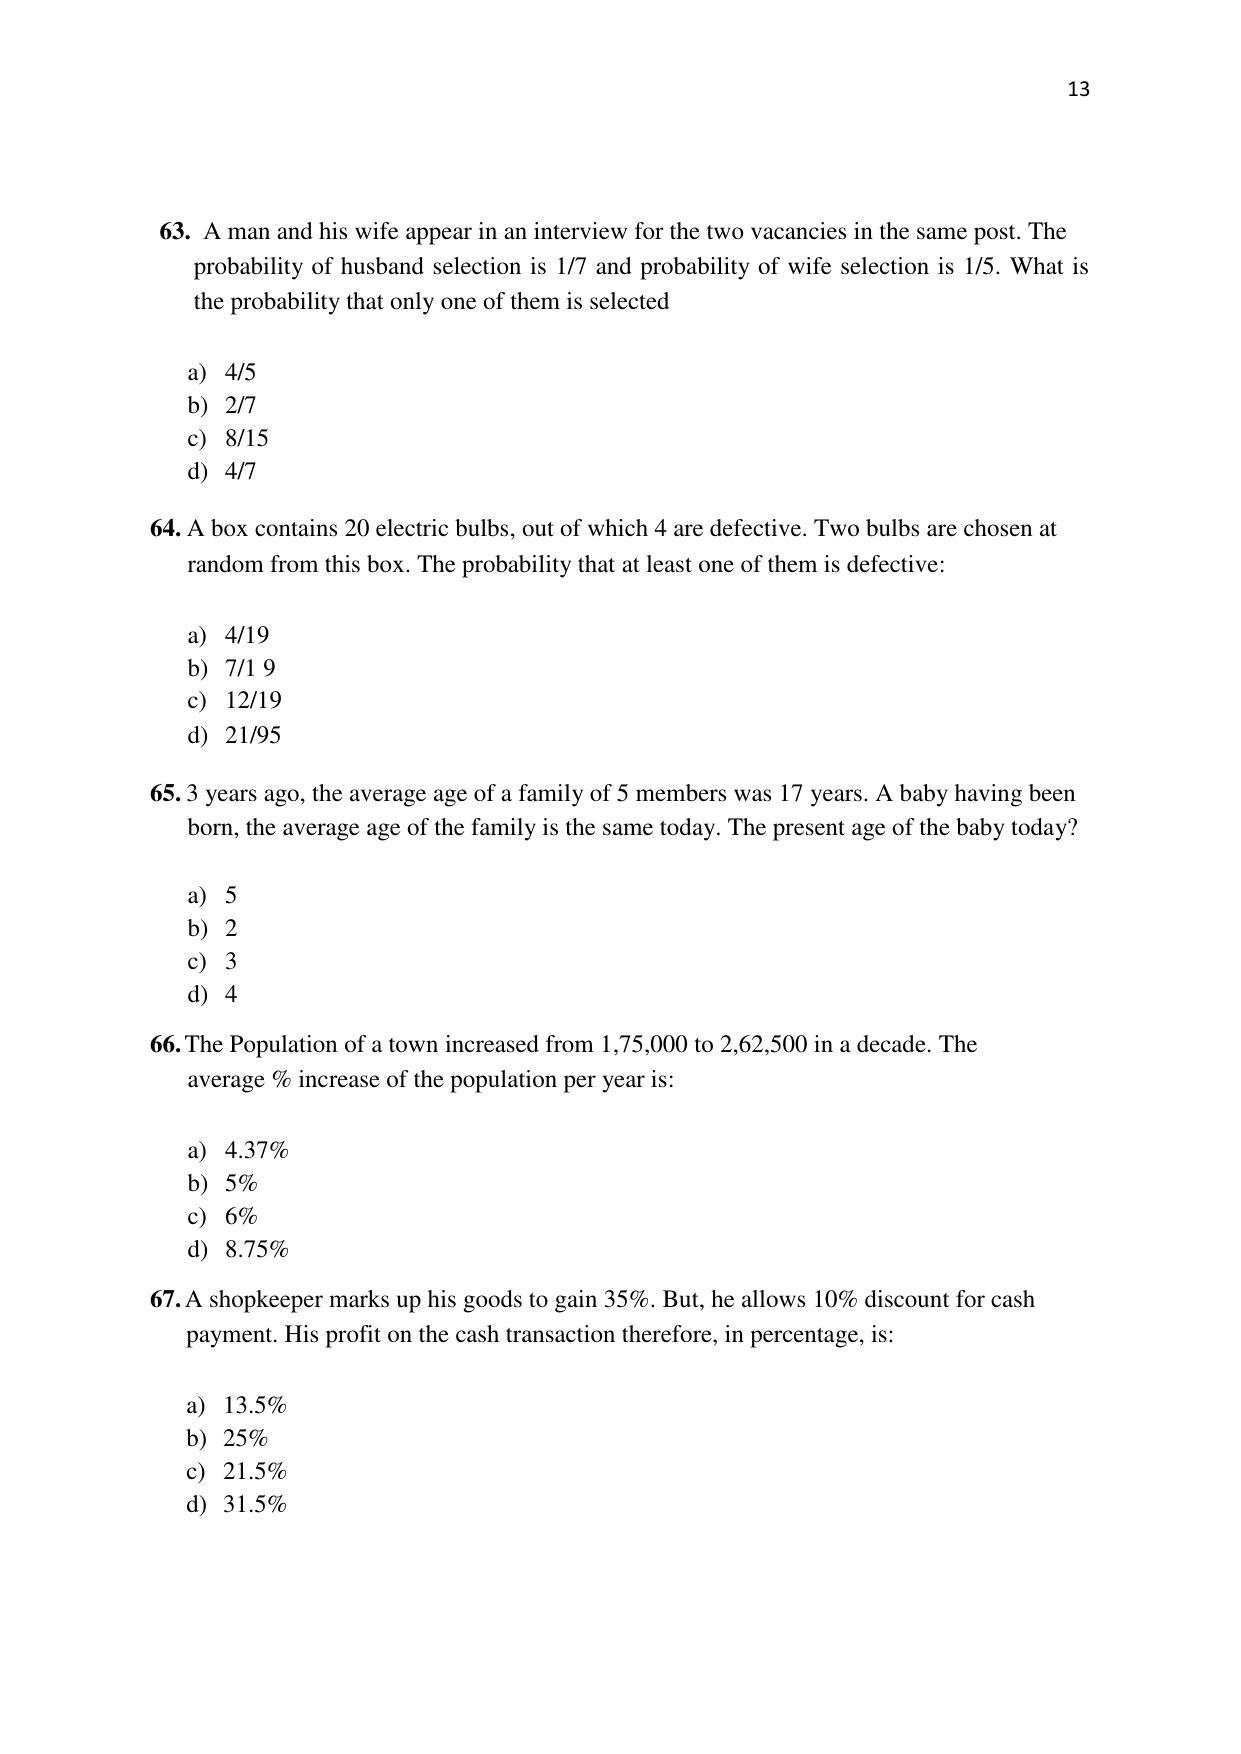 KMAT Question Papers - November 2016 - Page 13